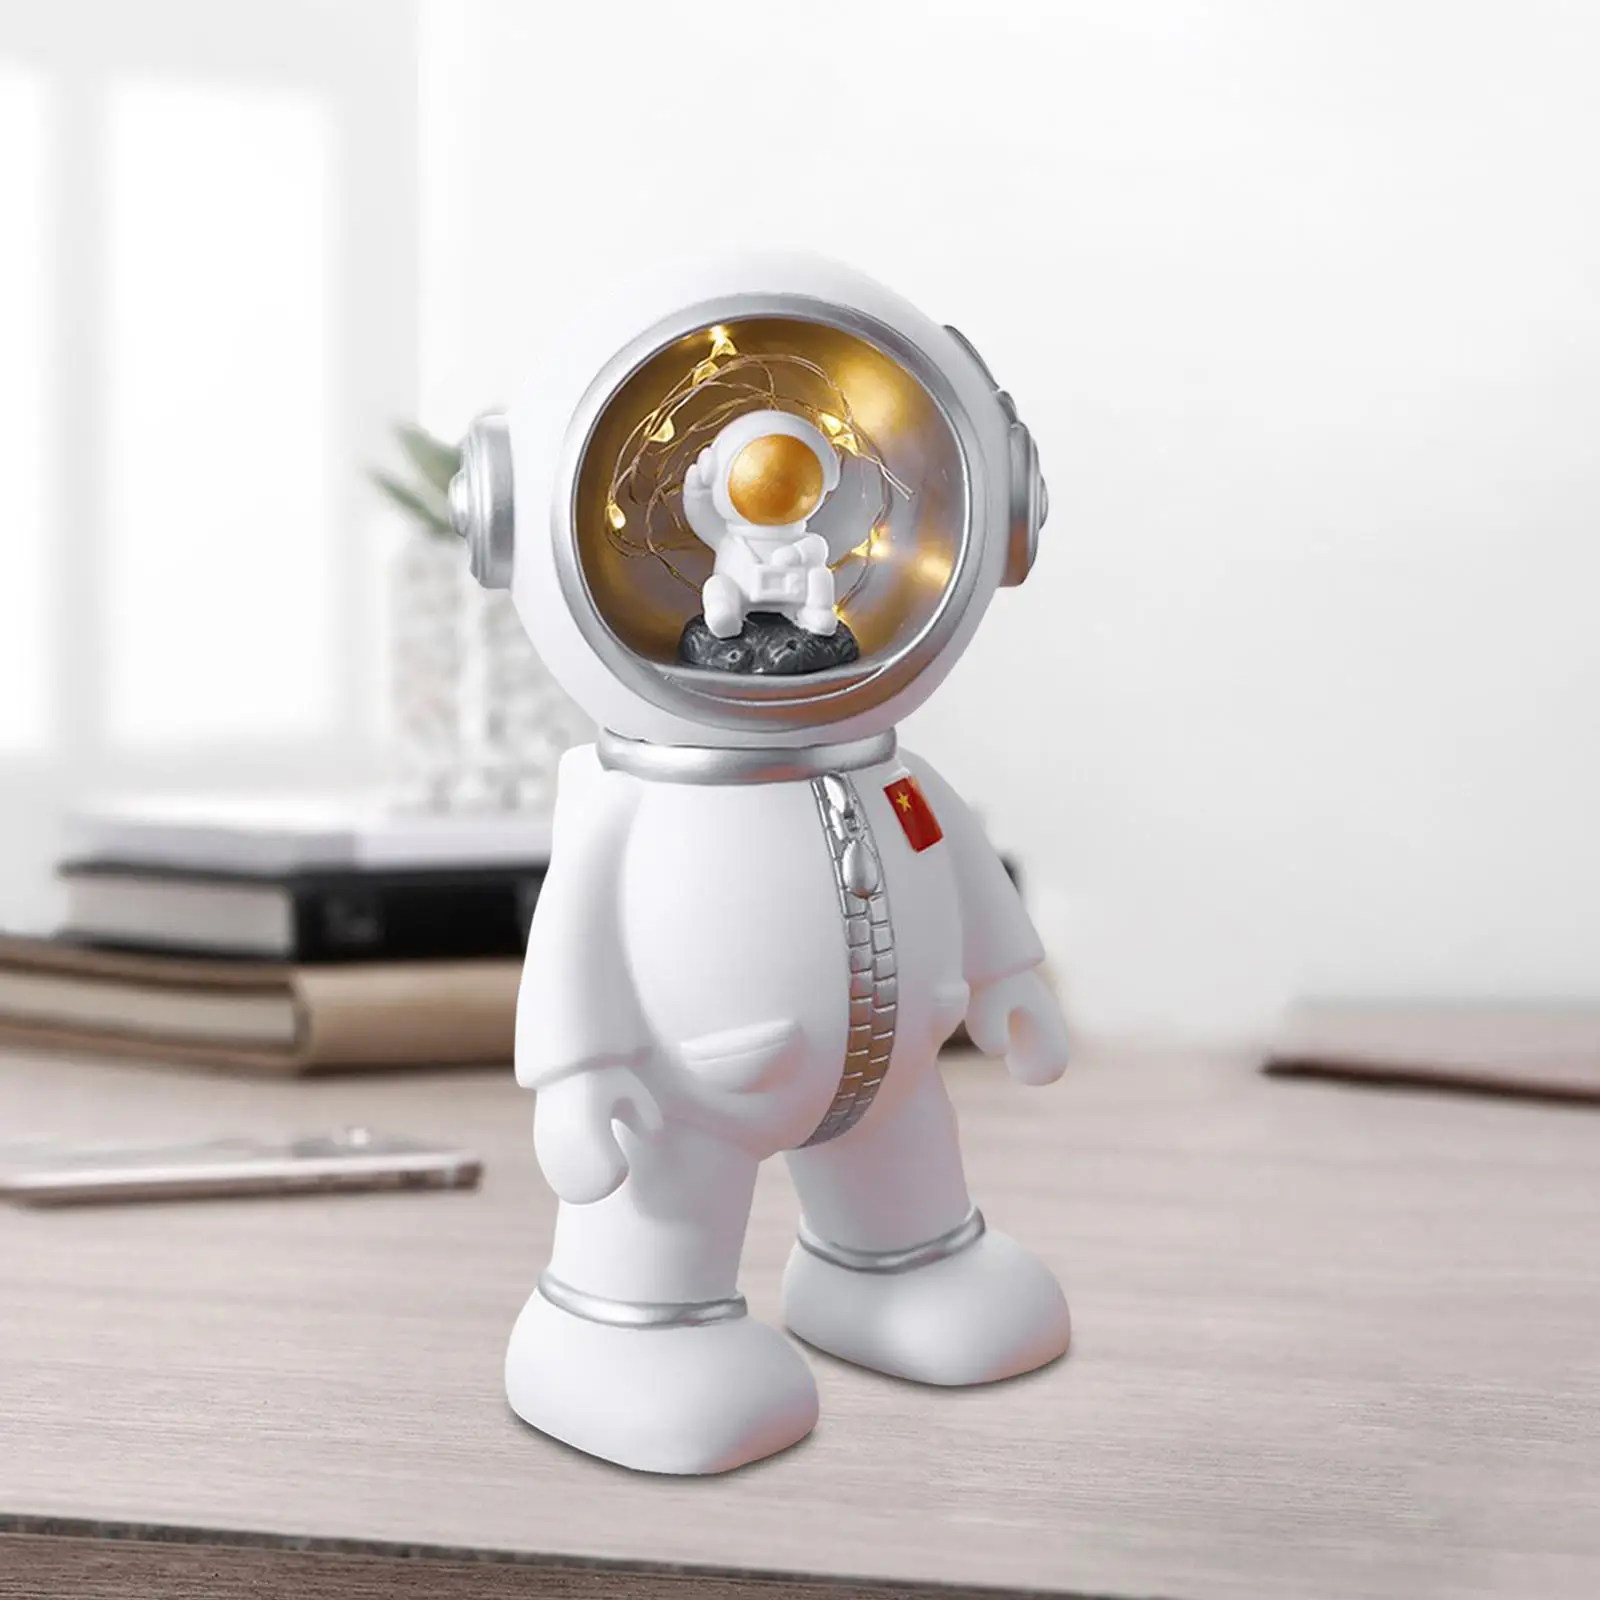 Portable Astronaut Piggy Bank Decorative with Lamp Coin Box for Girls Tabletop Gifts